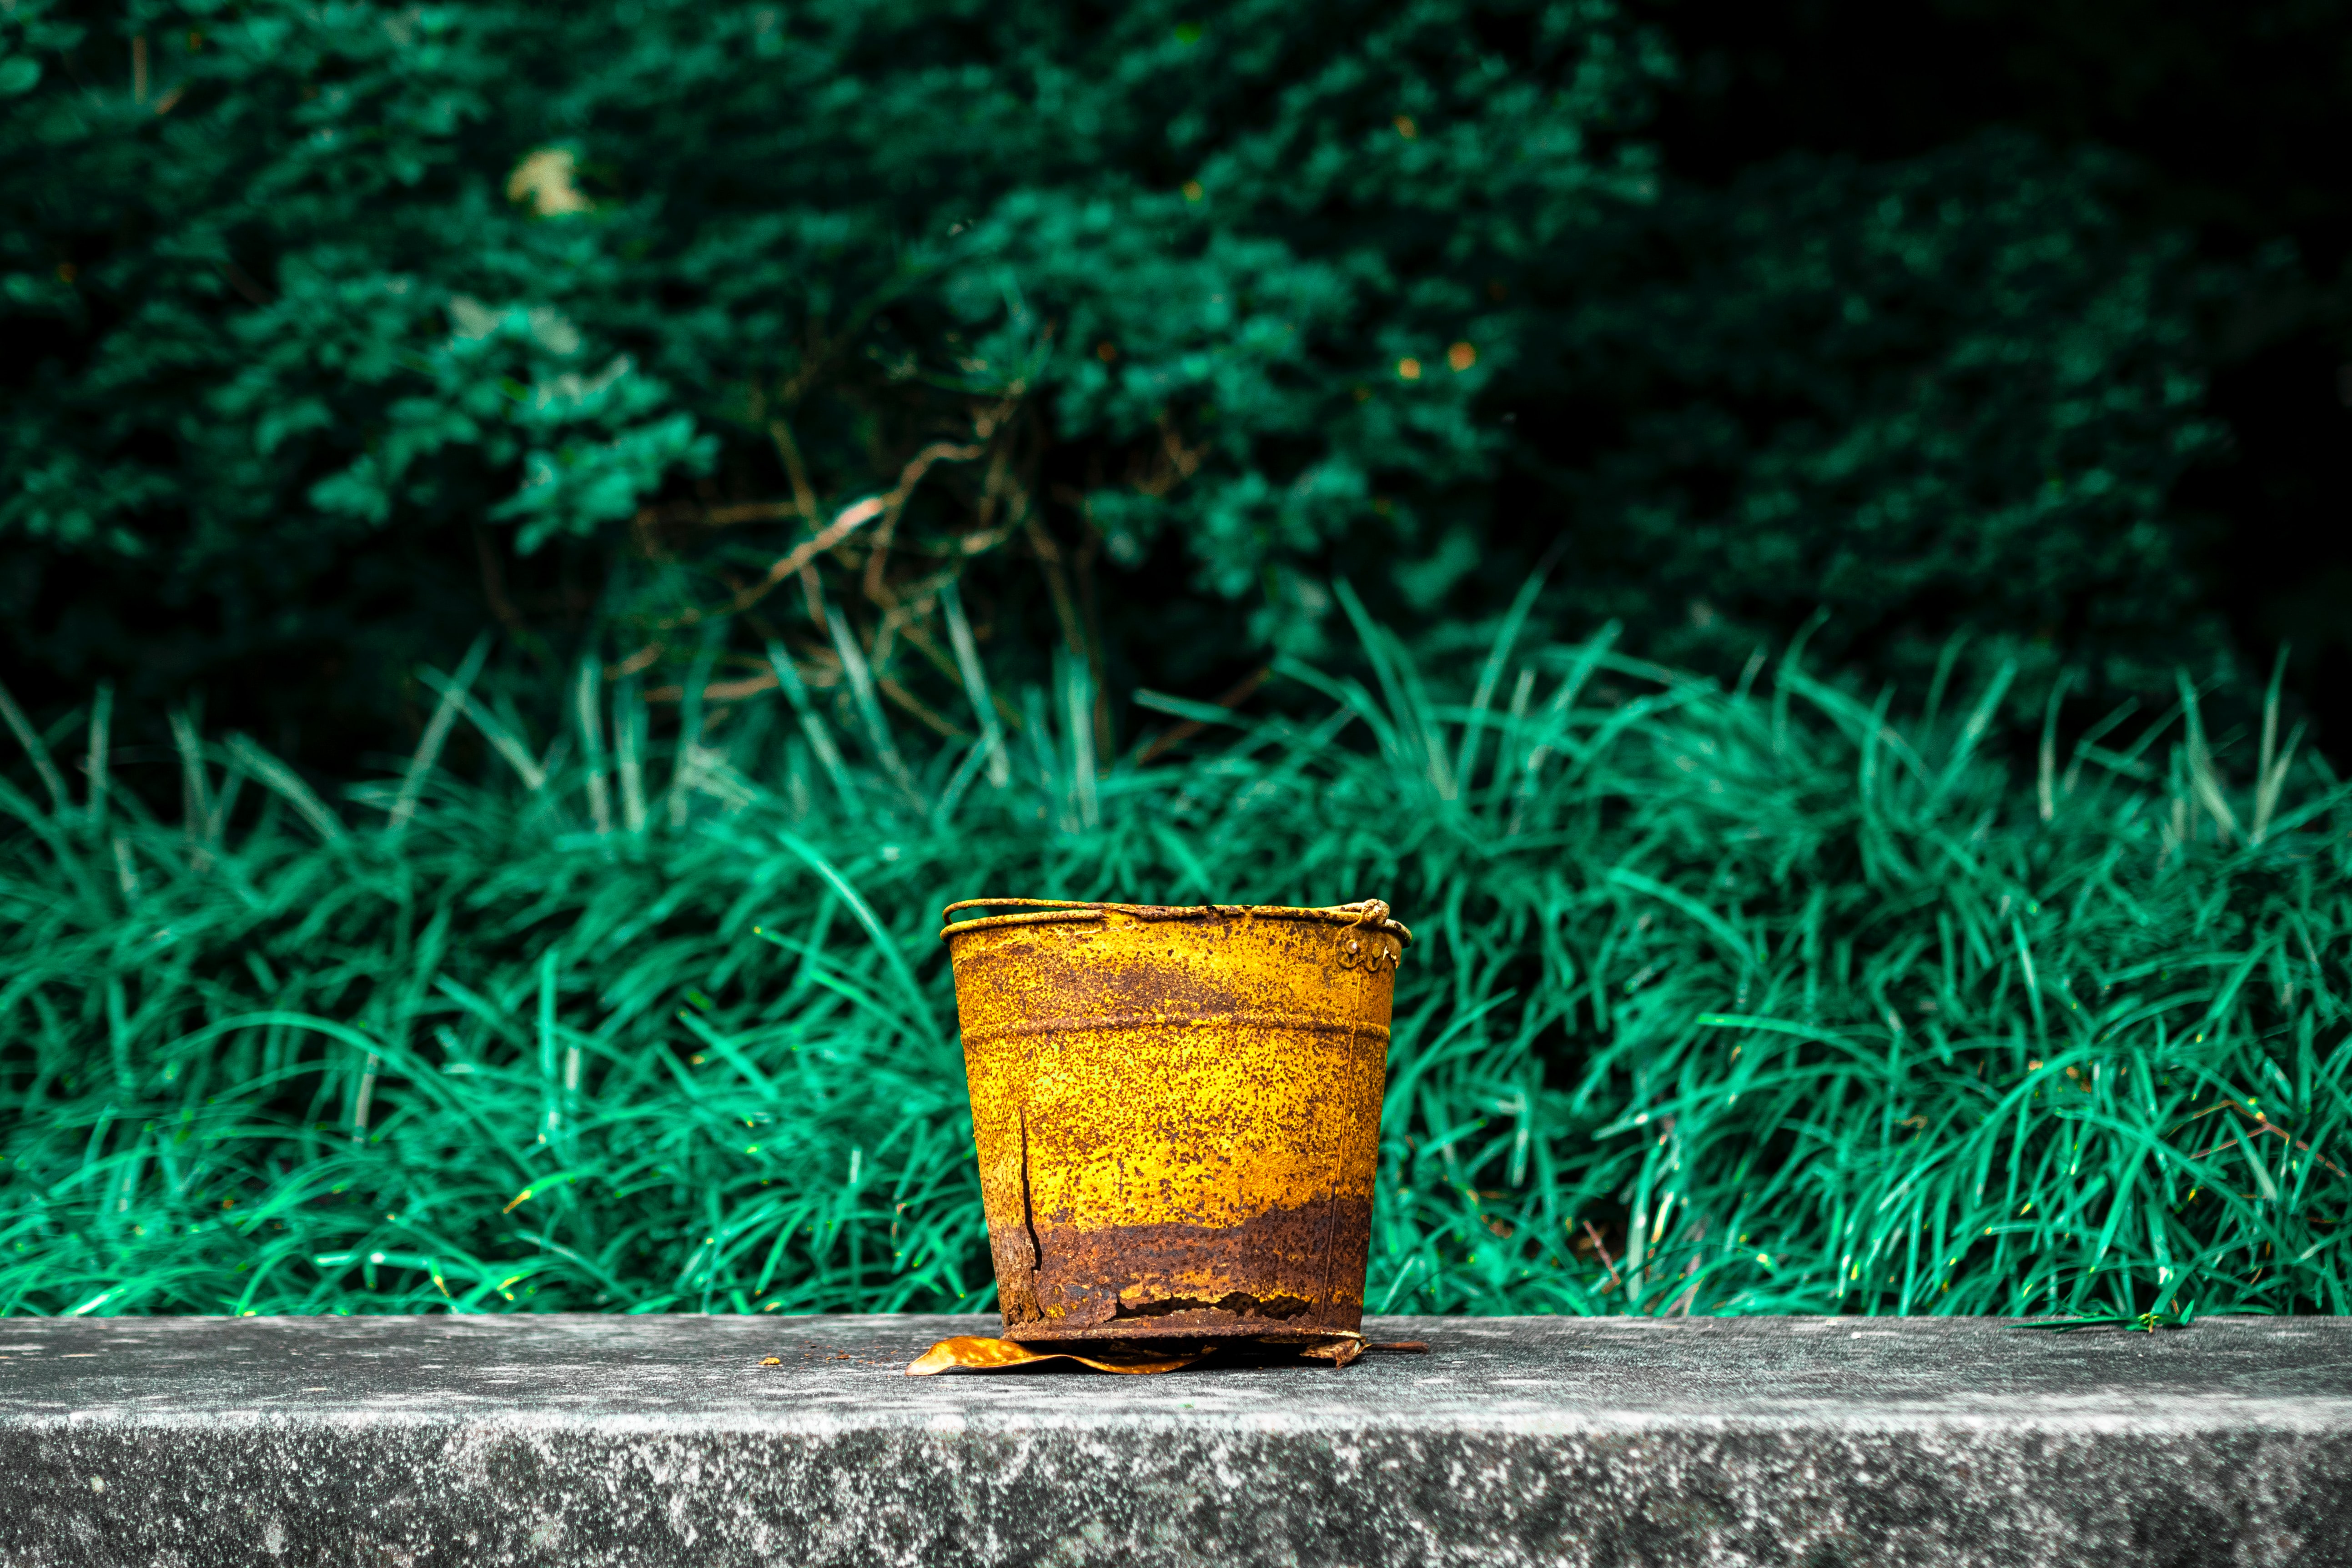 A rusty bucket sat on a stone floor in front of grass and trees